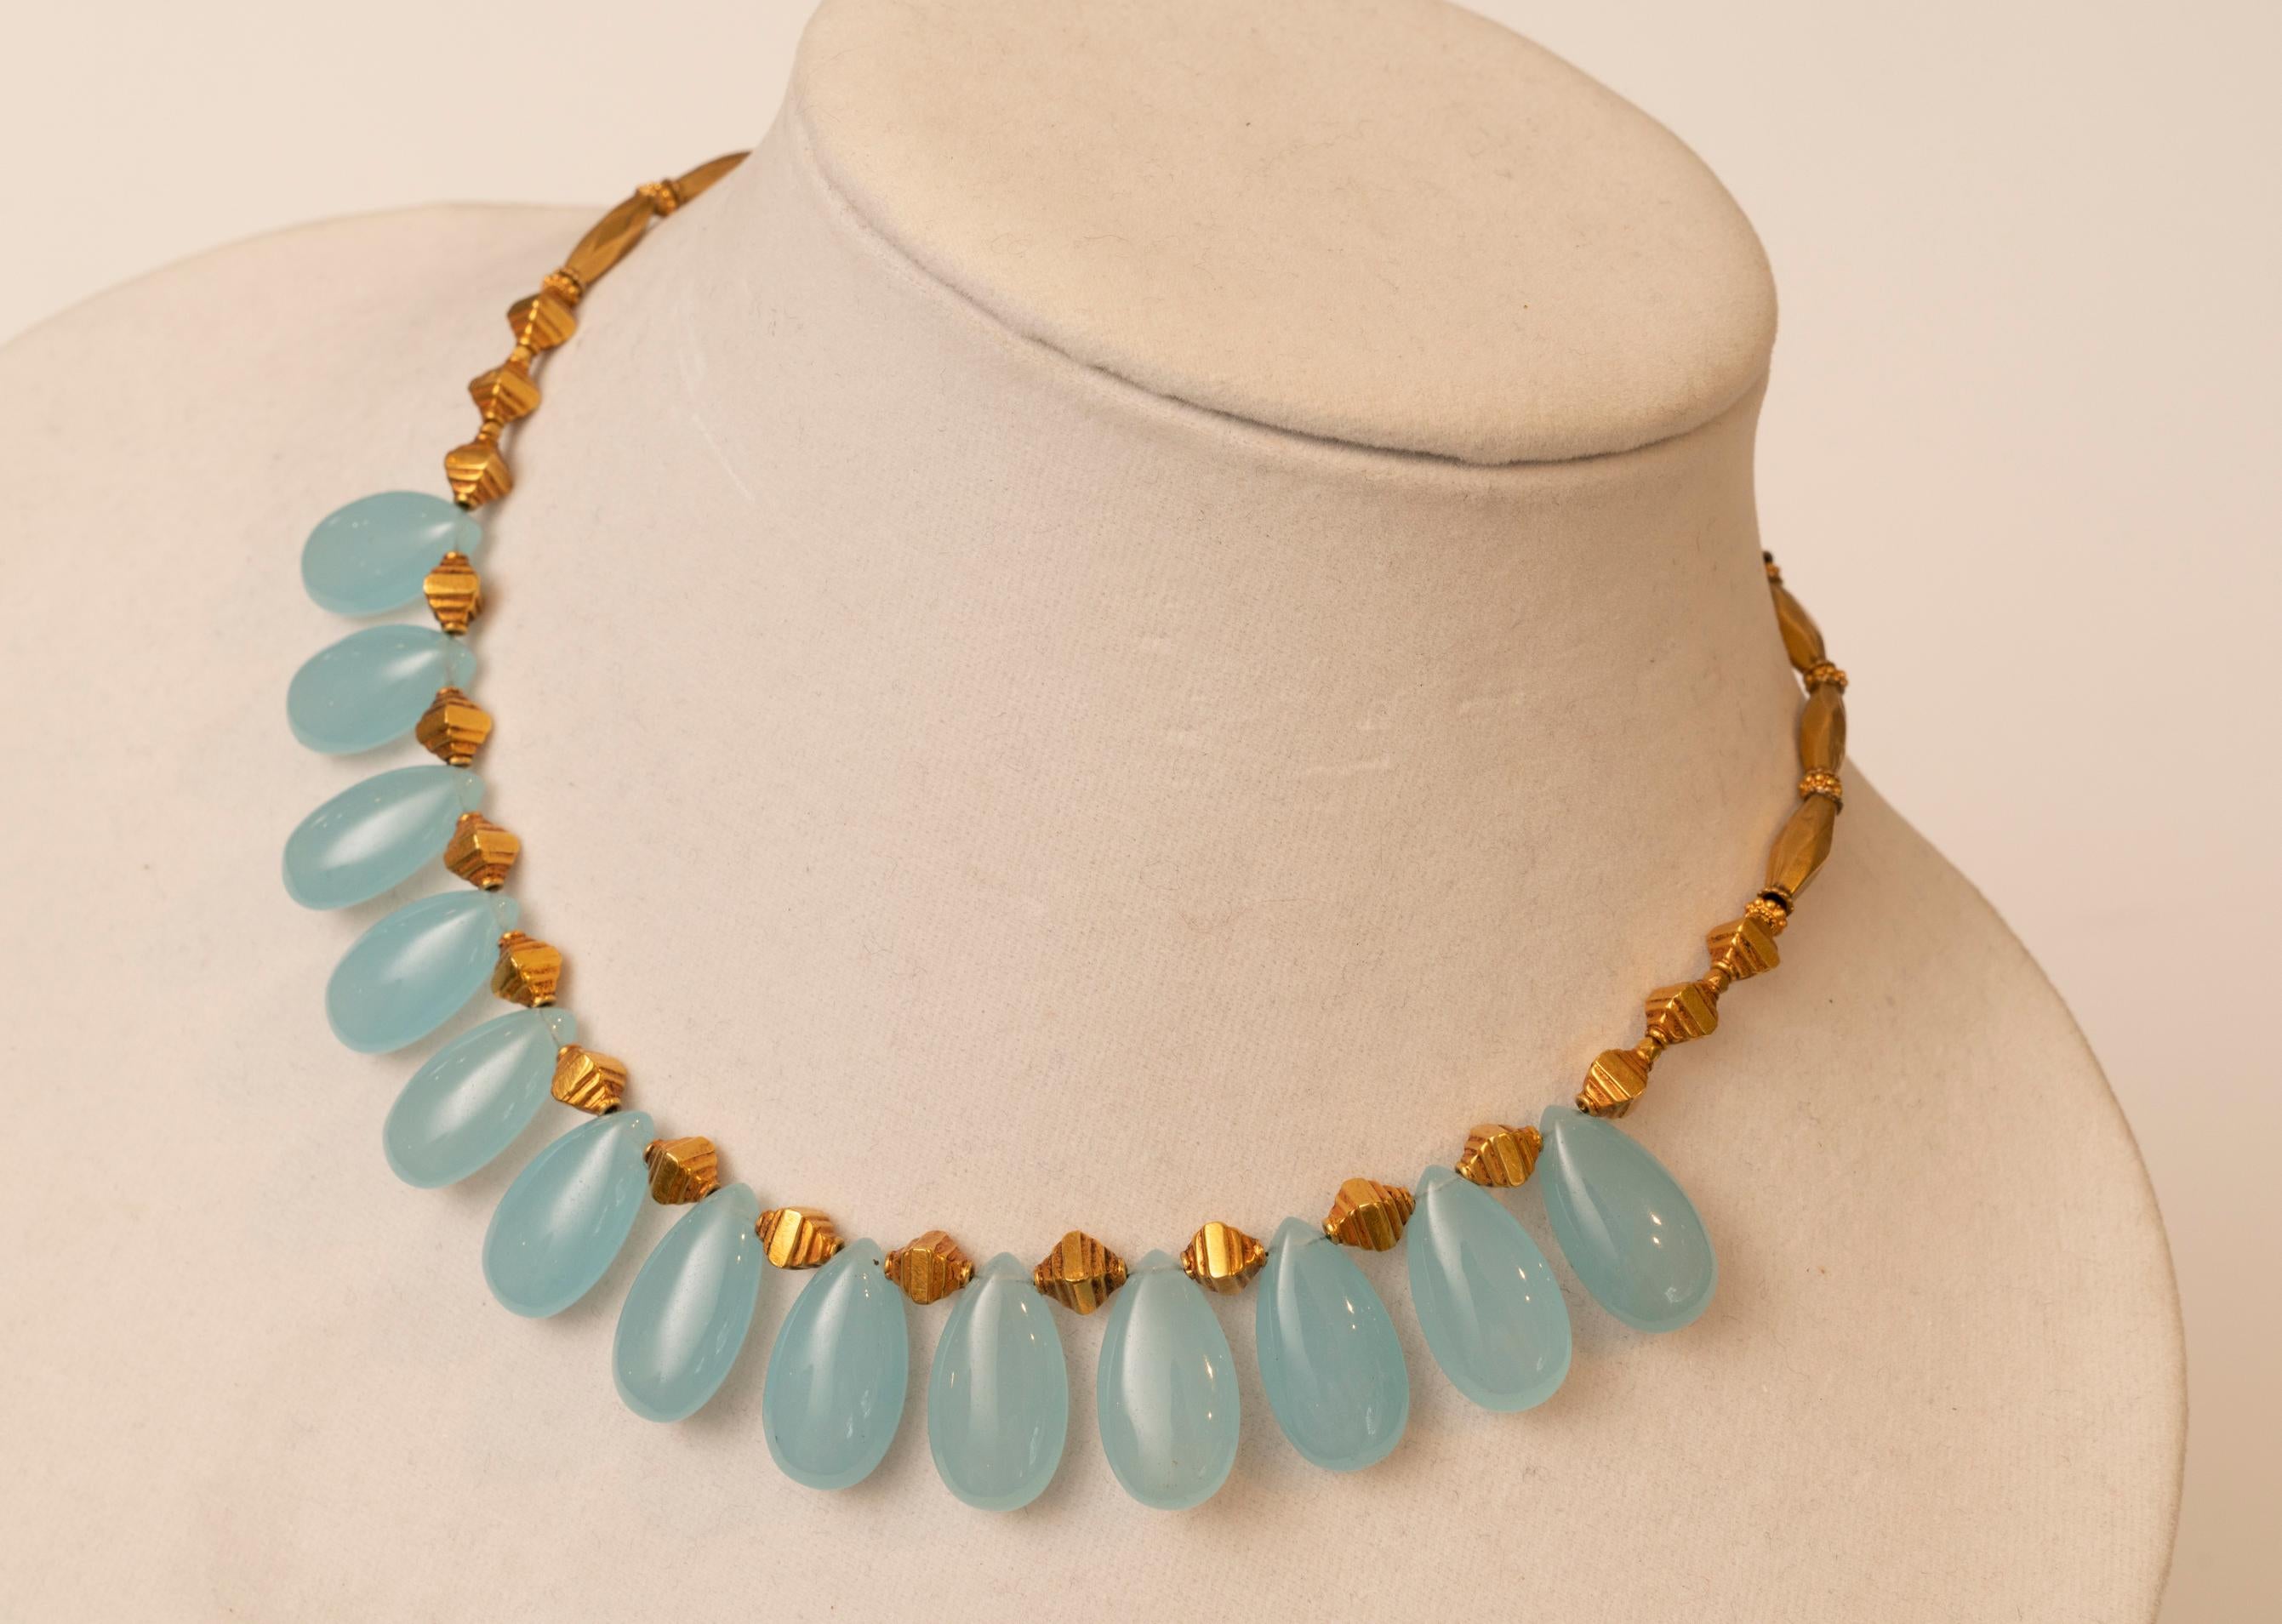 Stunning pear-shaped light blue chalcedony drops spaced with textured and turned 18K gold beads with an S-hook clasp at the back.  The chalcedony beads themselves measure 7/8 inches long and 7/16's wide.  This can be worn on an open neckline or